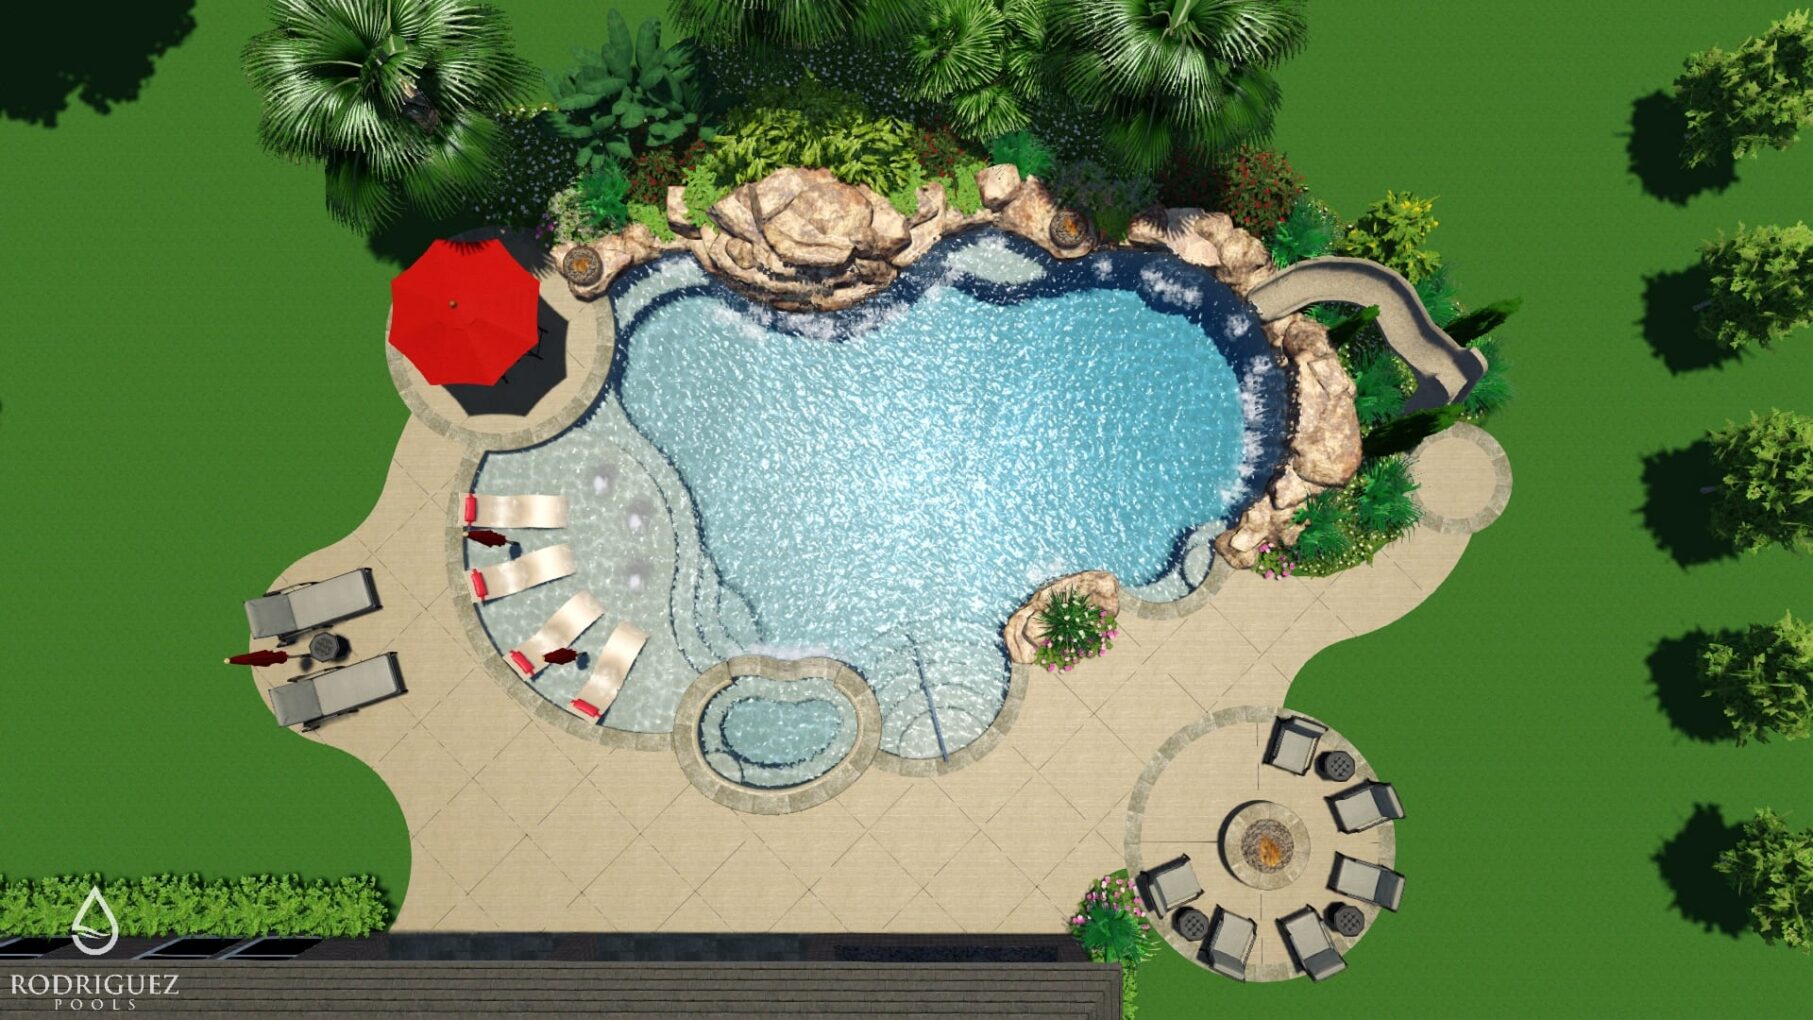 A pool with an area for lounging and swimming.